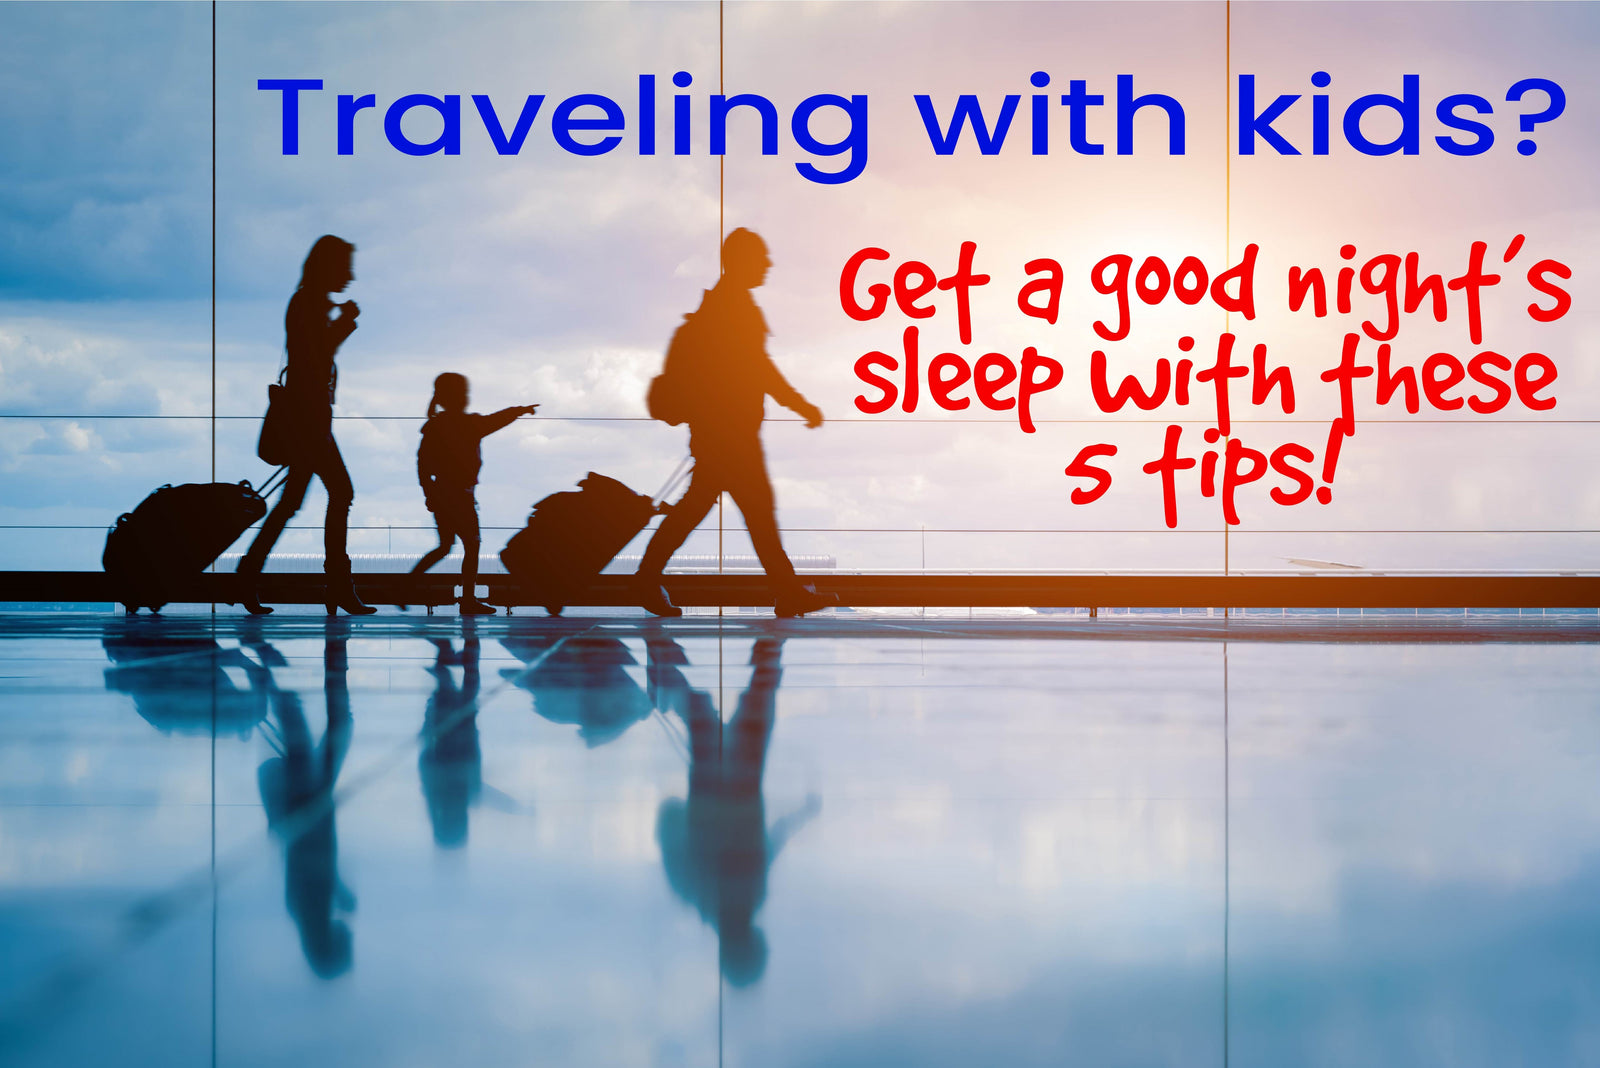 Get a good night's sleep while traveling with kids